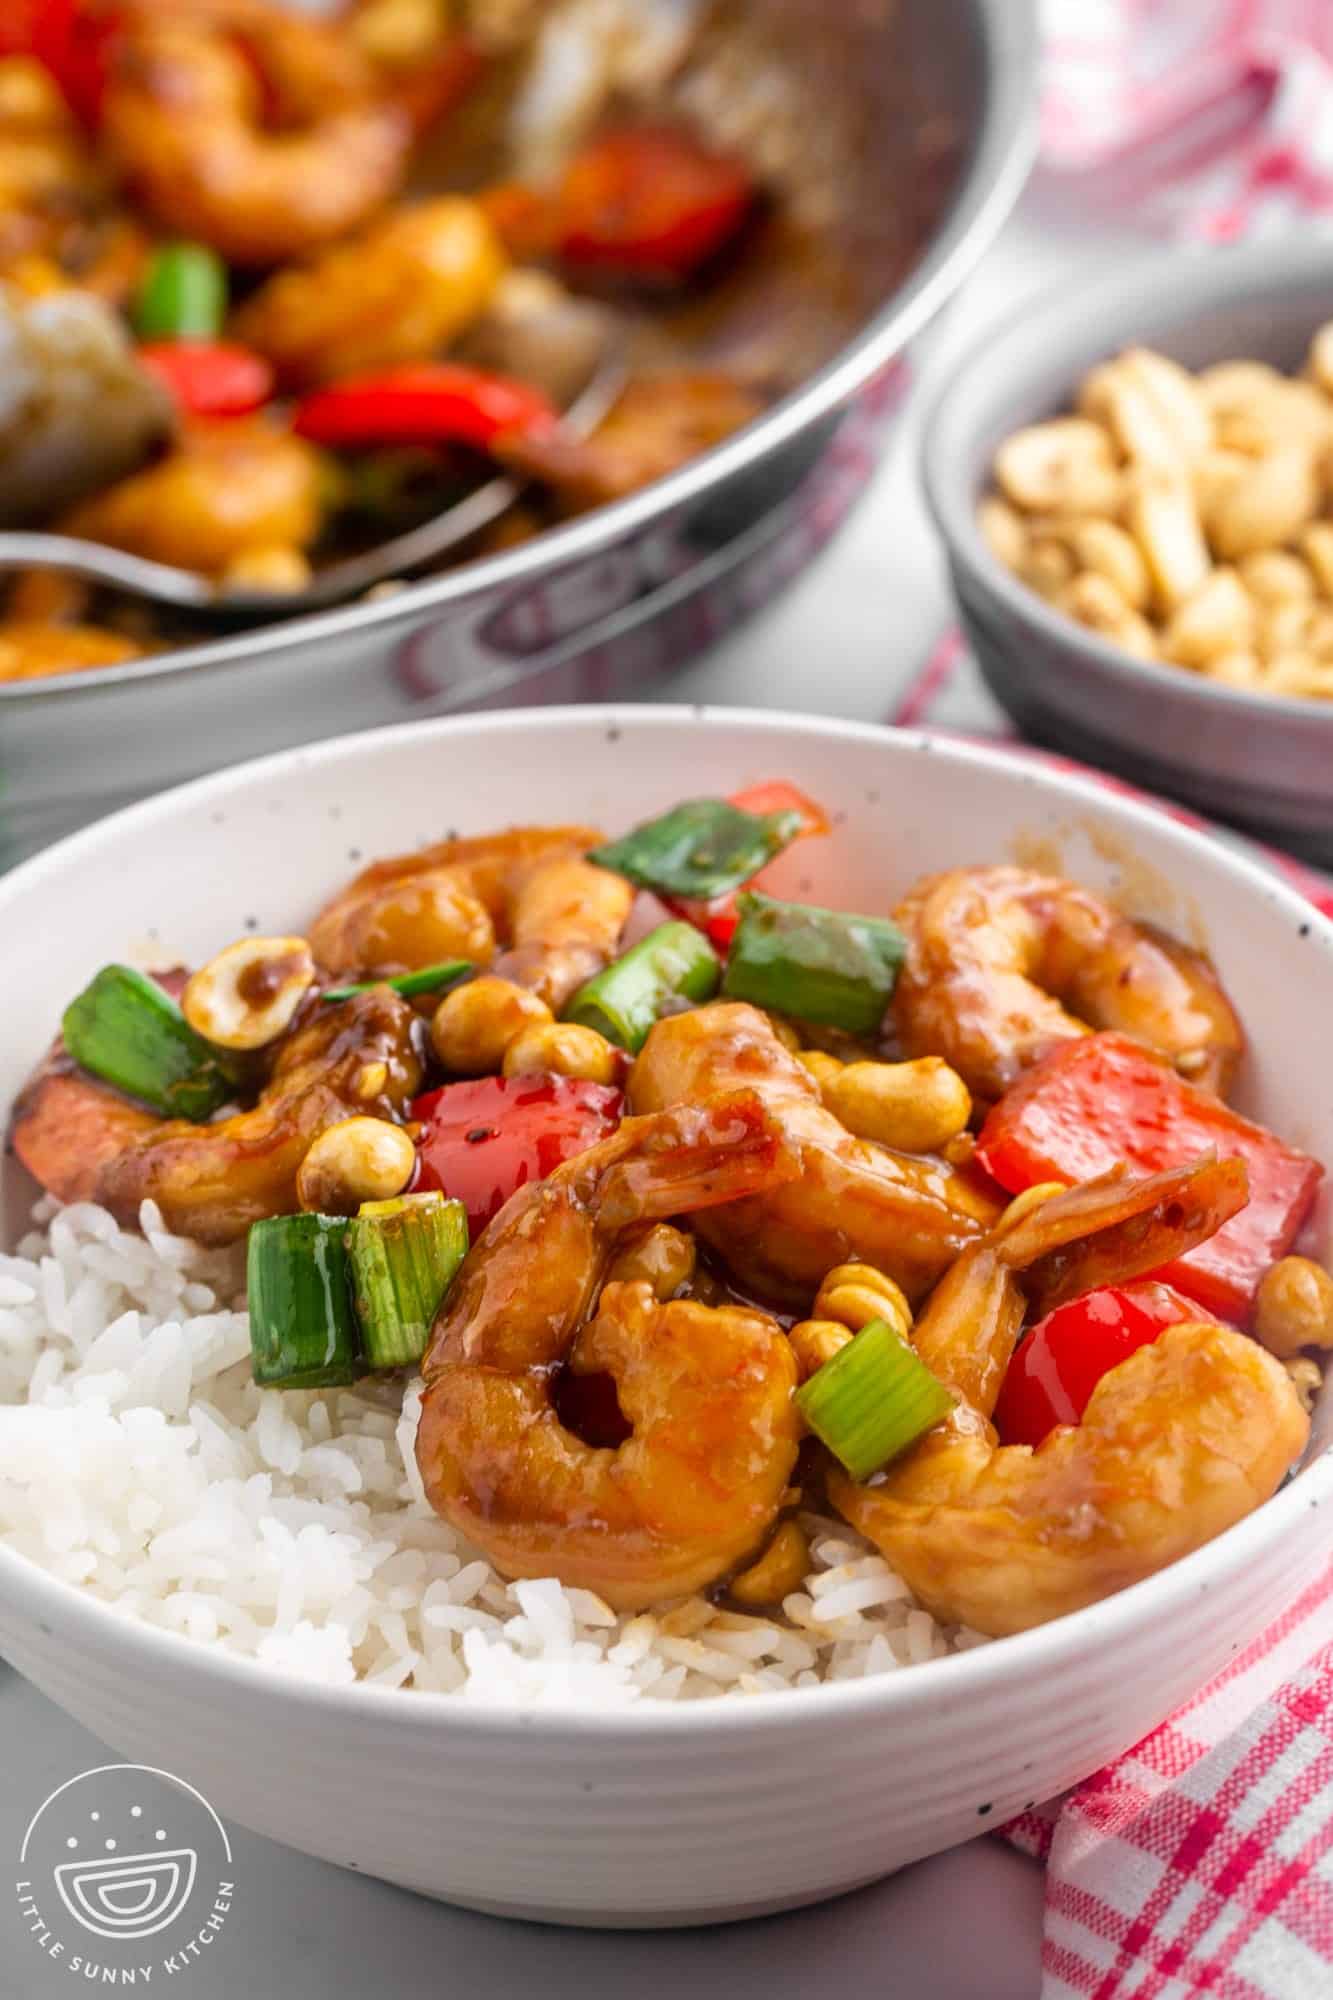 Kung pao shrimp served over white rice in a white bowl